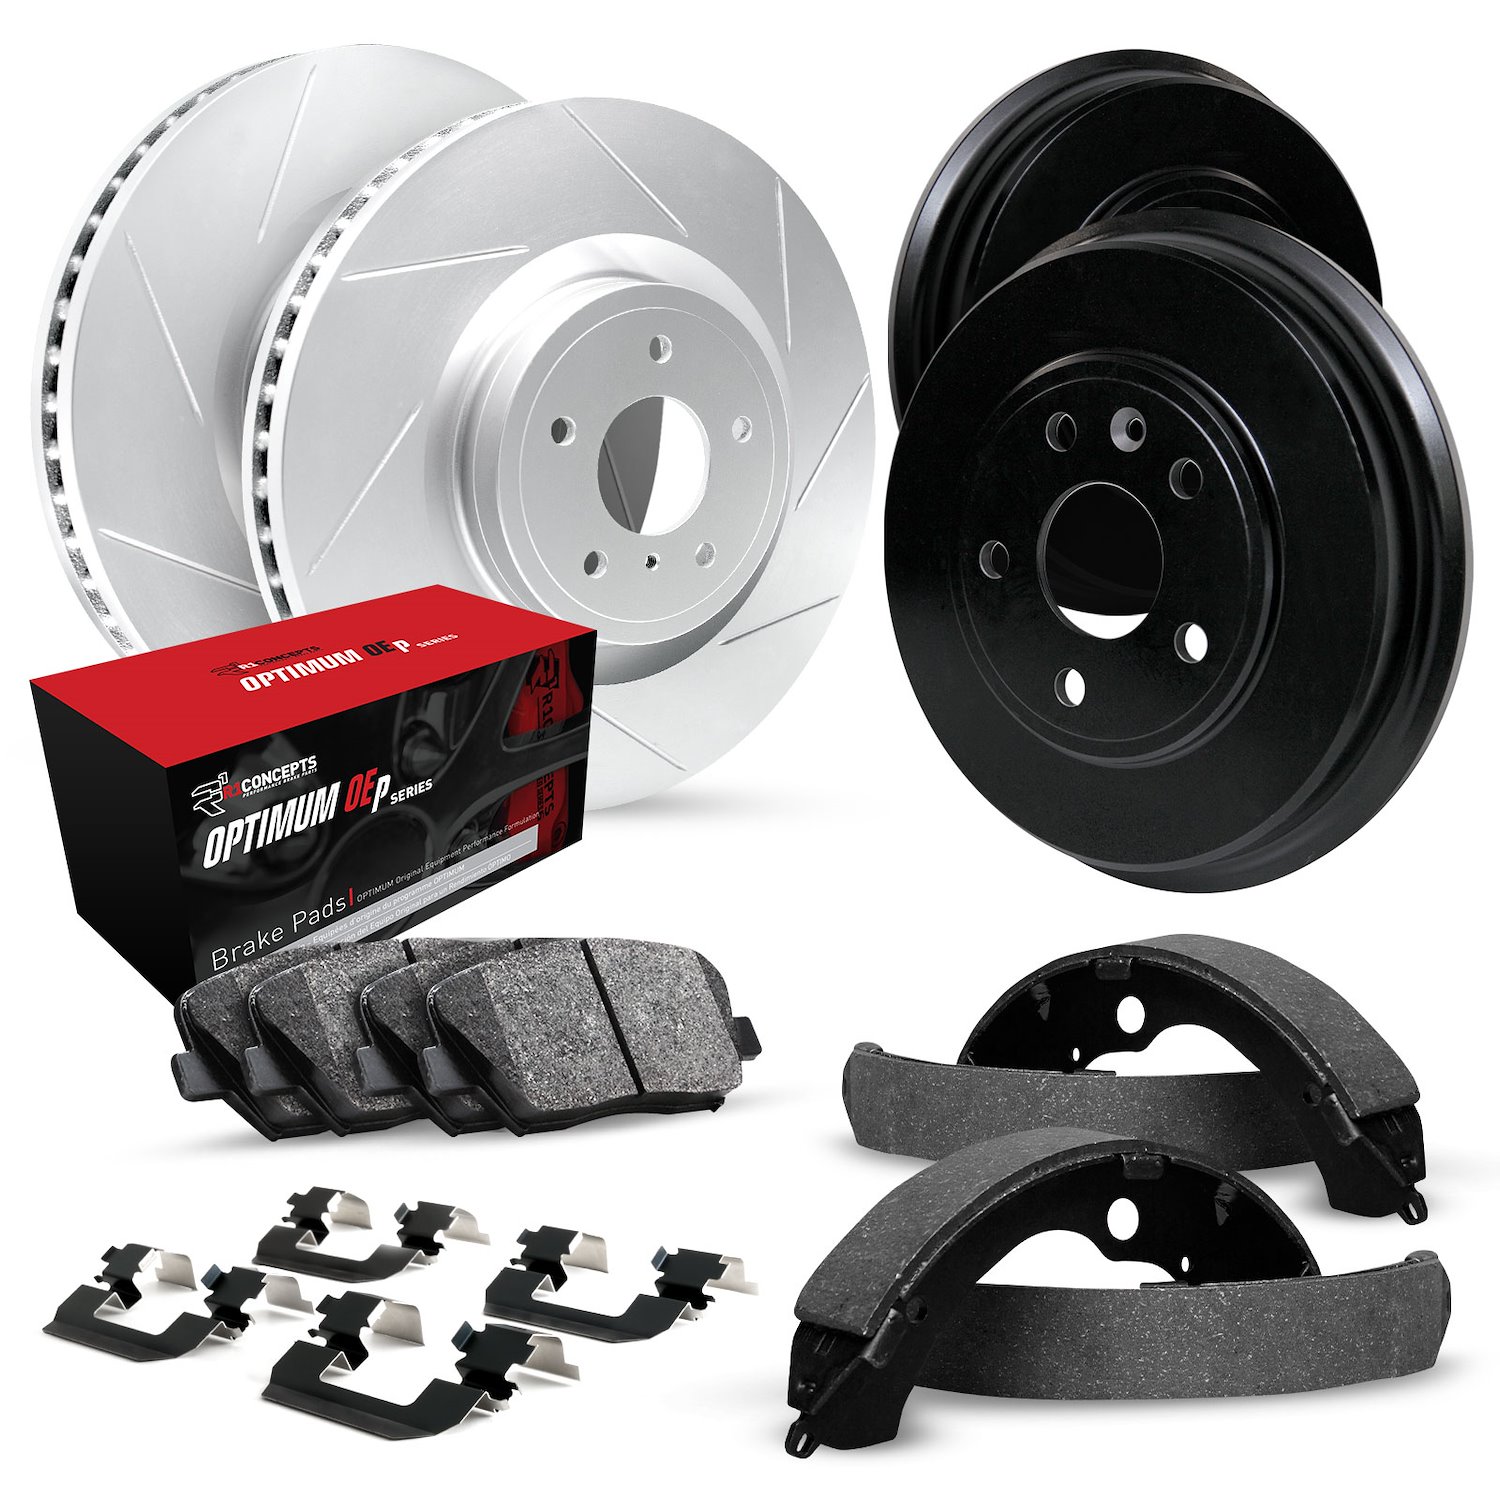 GEO-Carbon Slotted Brake Rotor & Drum Set w/Optimum OE Pads, Shoes, & Hardware, 2001-2005 Ford/Lincoln/Mercury/Mazda